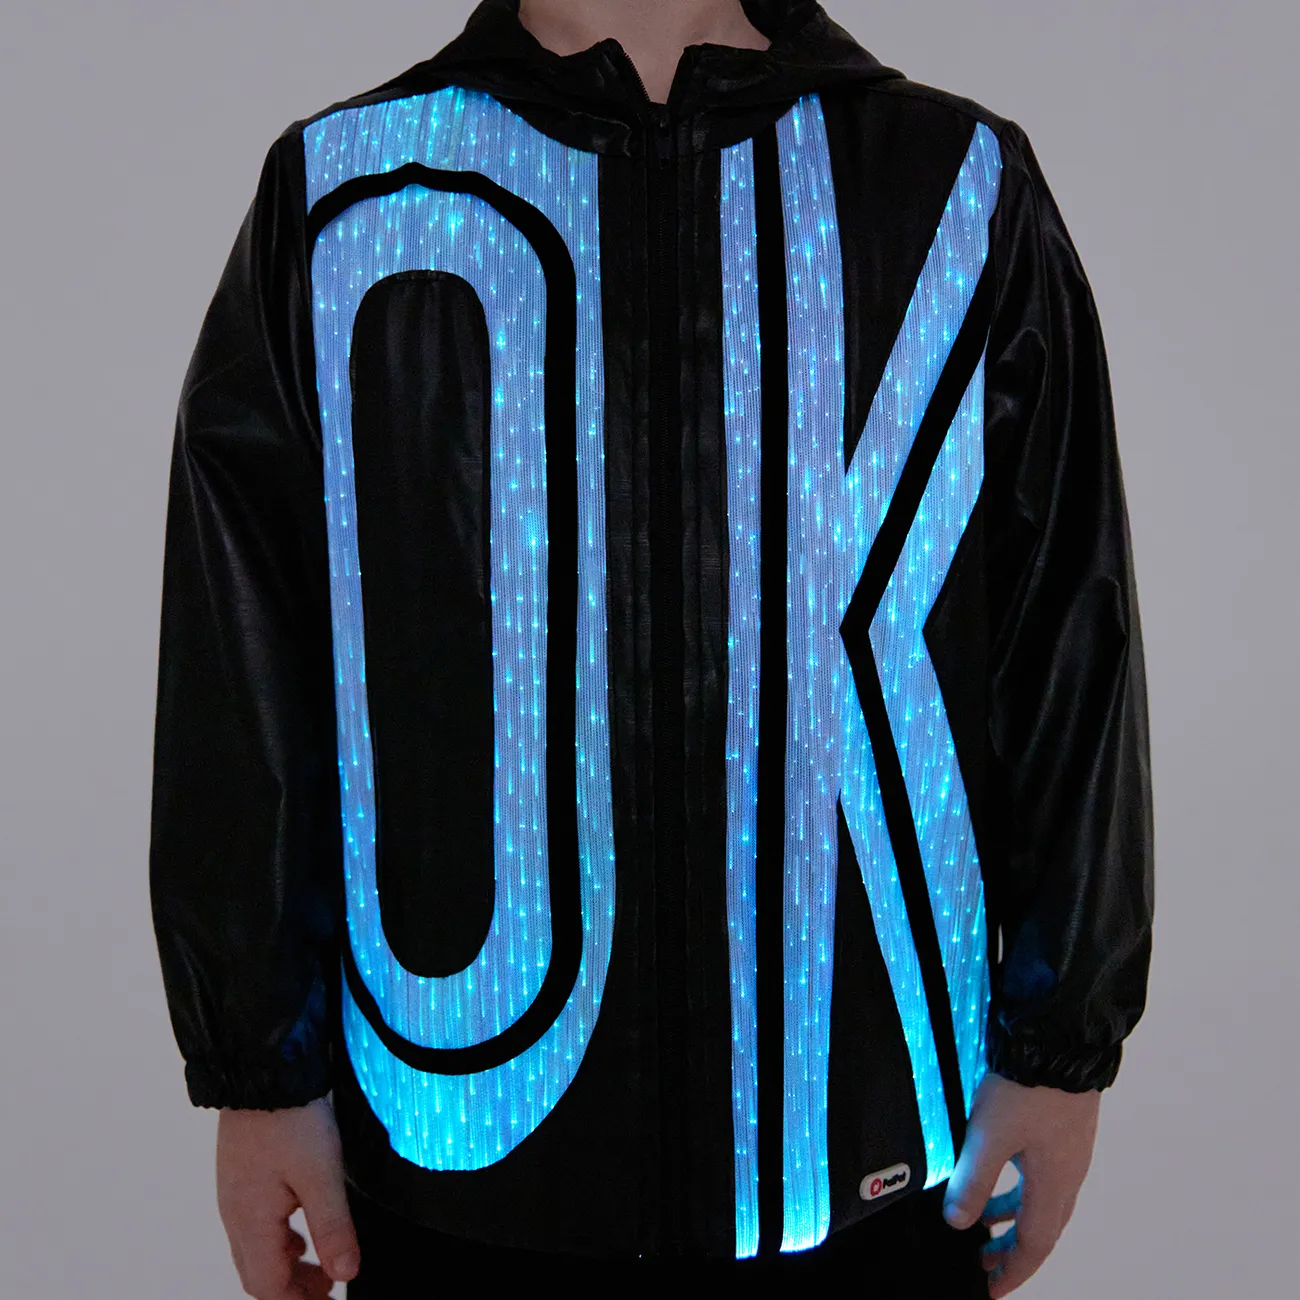 Go-Glow Illuminating Jacket with Light Up OK Pattern Including Controller (Built-In Battery) BlackandWhite big image 1